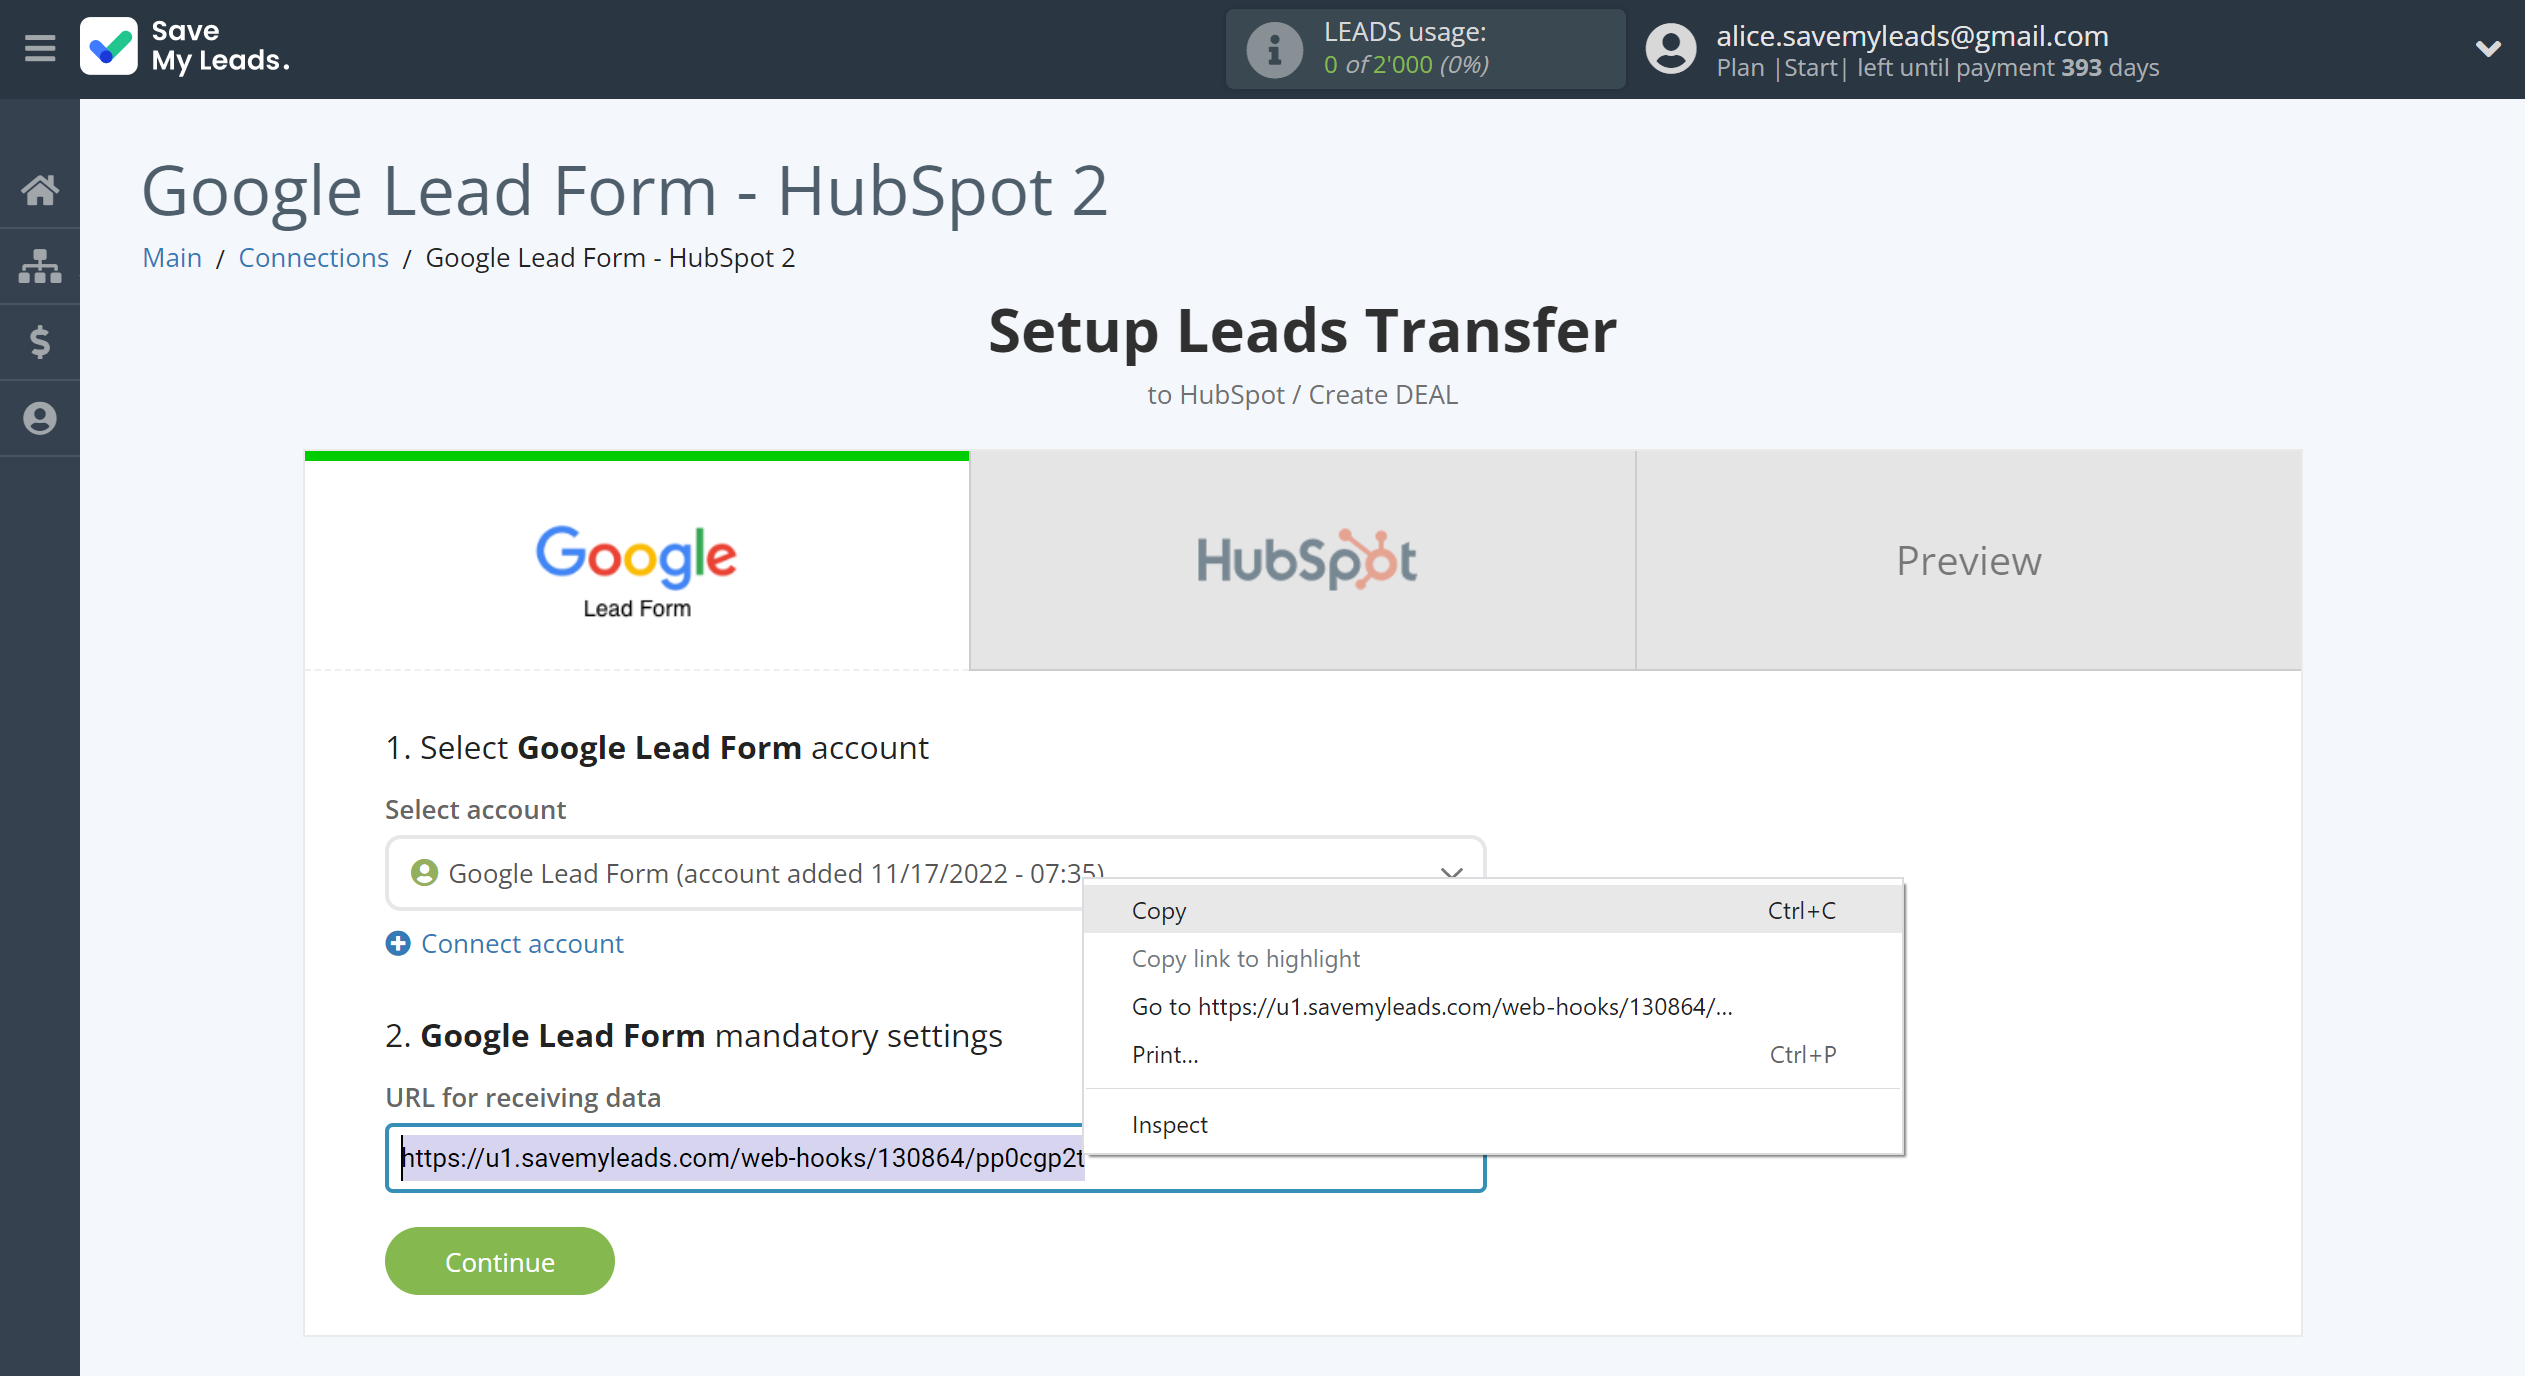 How to Connect Google Lead Form with HubSpot Create Deal | Data Source account connection